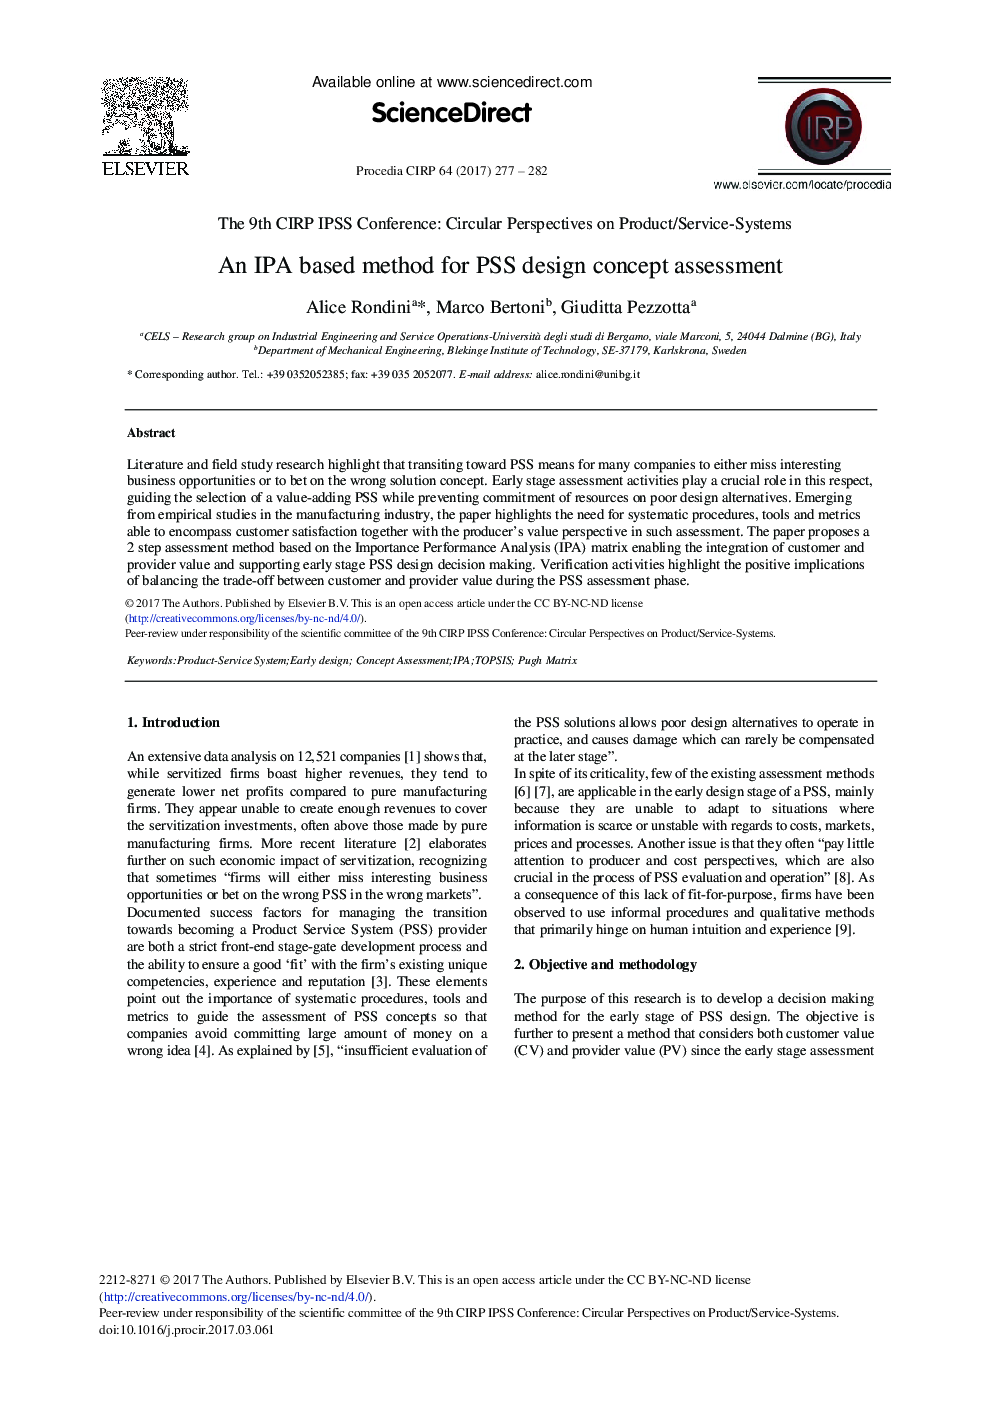 An IPA Based Method for PSS Design Concept Assessment